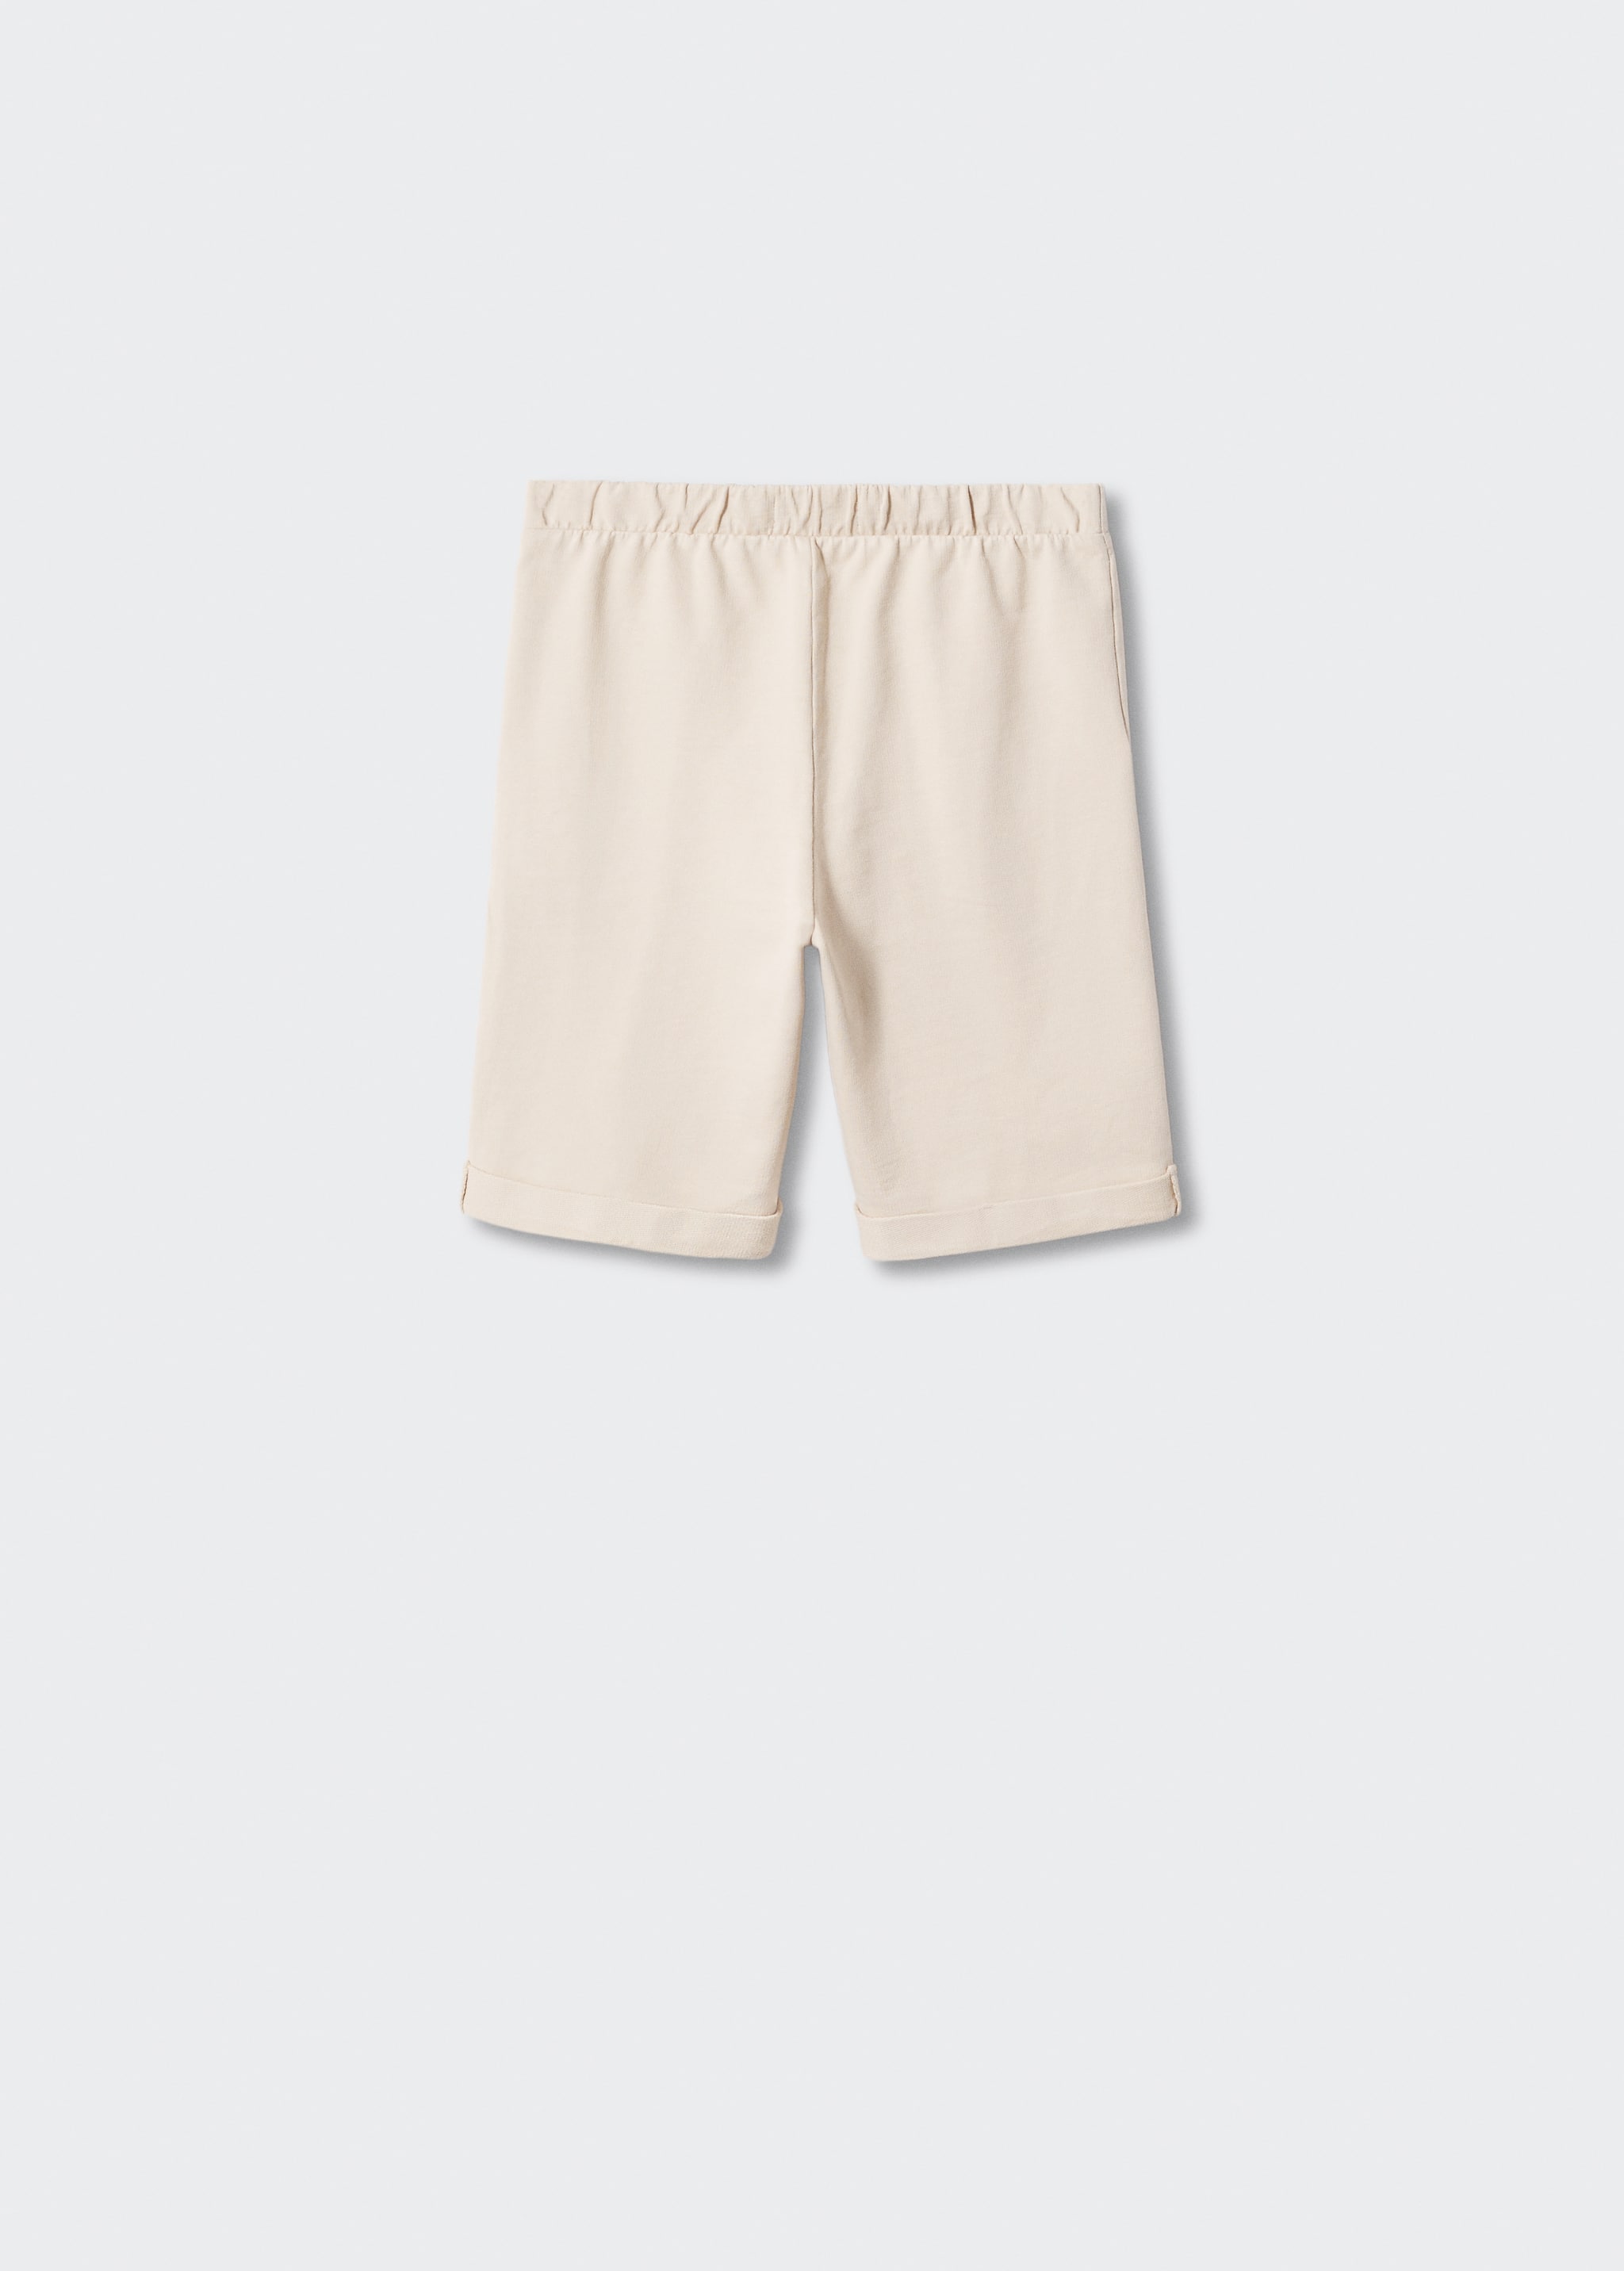 Cotton Bermuda shorts - Reverse of the article